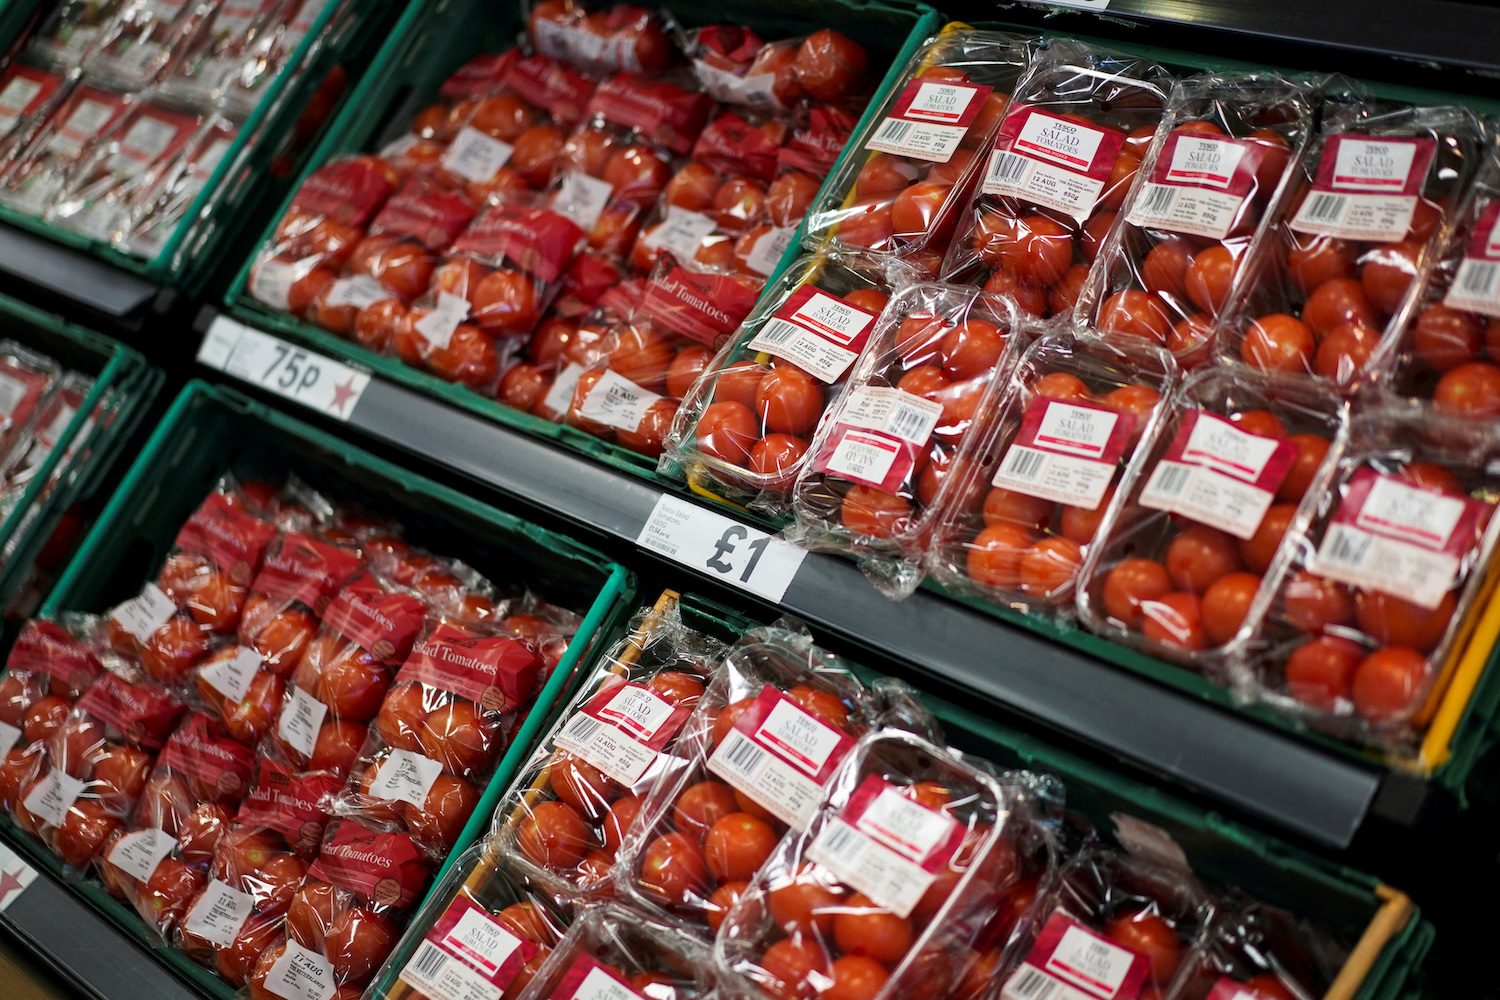 Where are the tomatoes? Britain faces shortage as imports hit